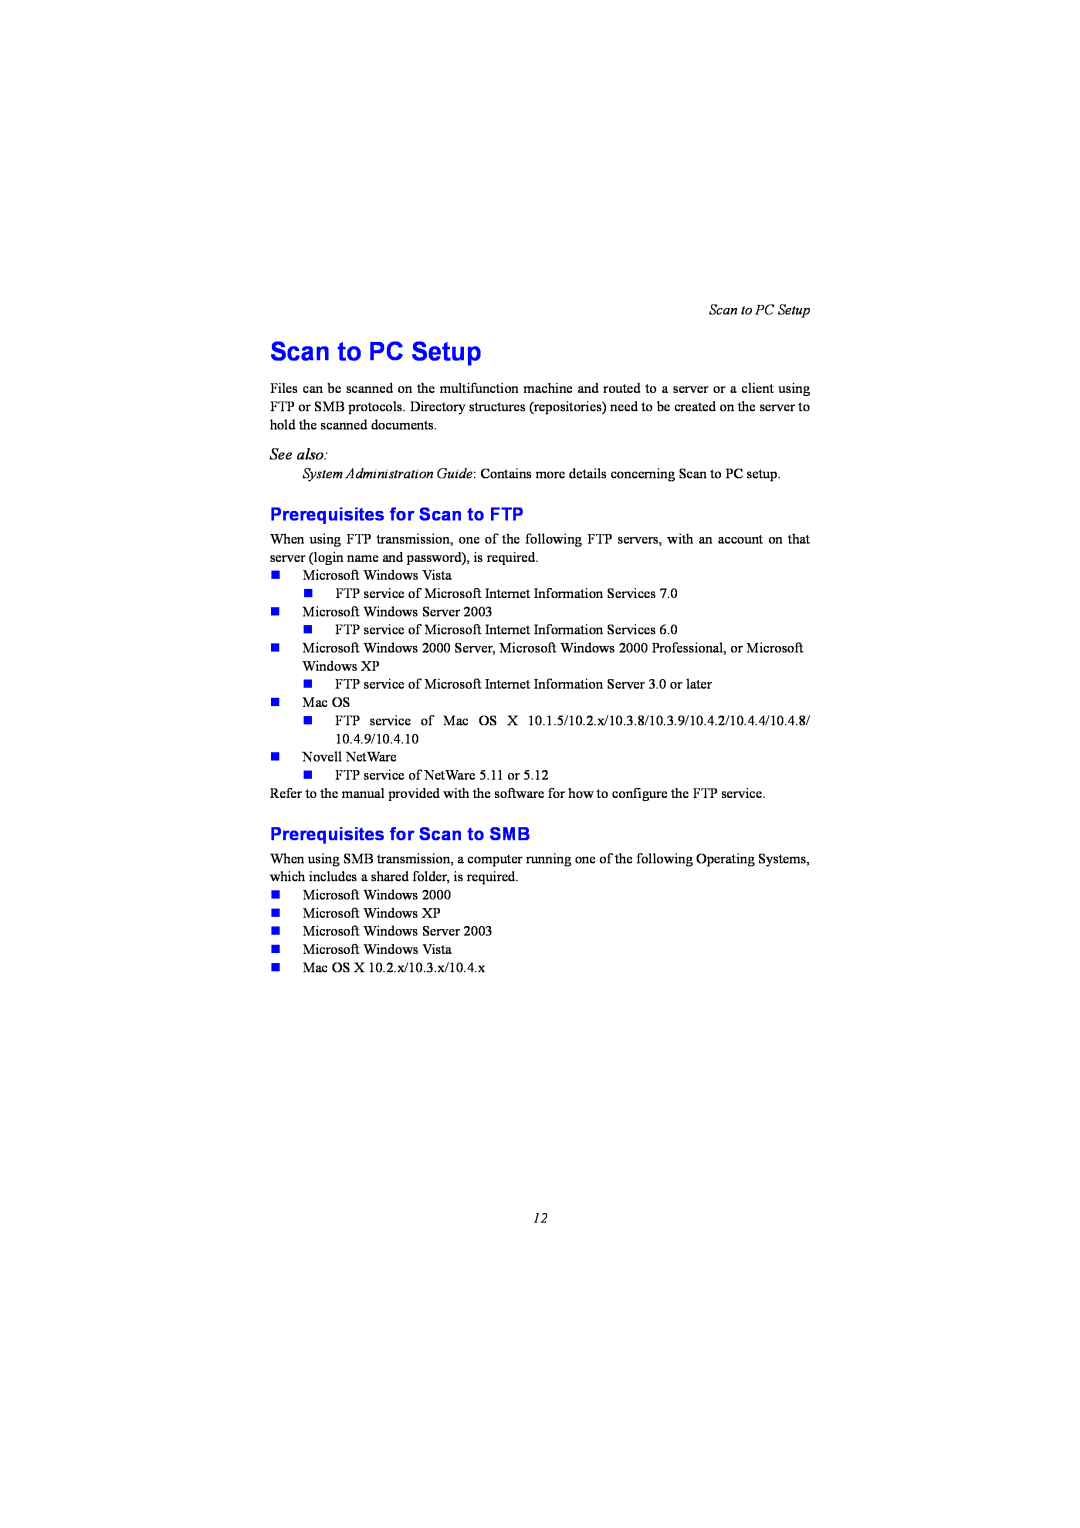 Xerox WC5230 setup guide Scan to PC Setup, Prerequisites for Scan to FTP, Prerequisites for Scan to SMB, See also 